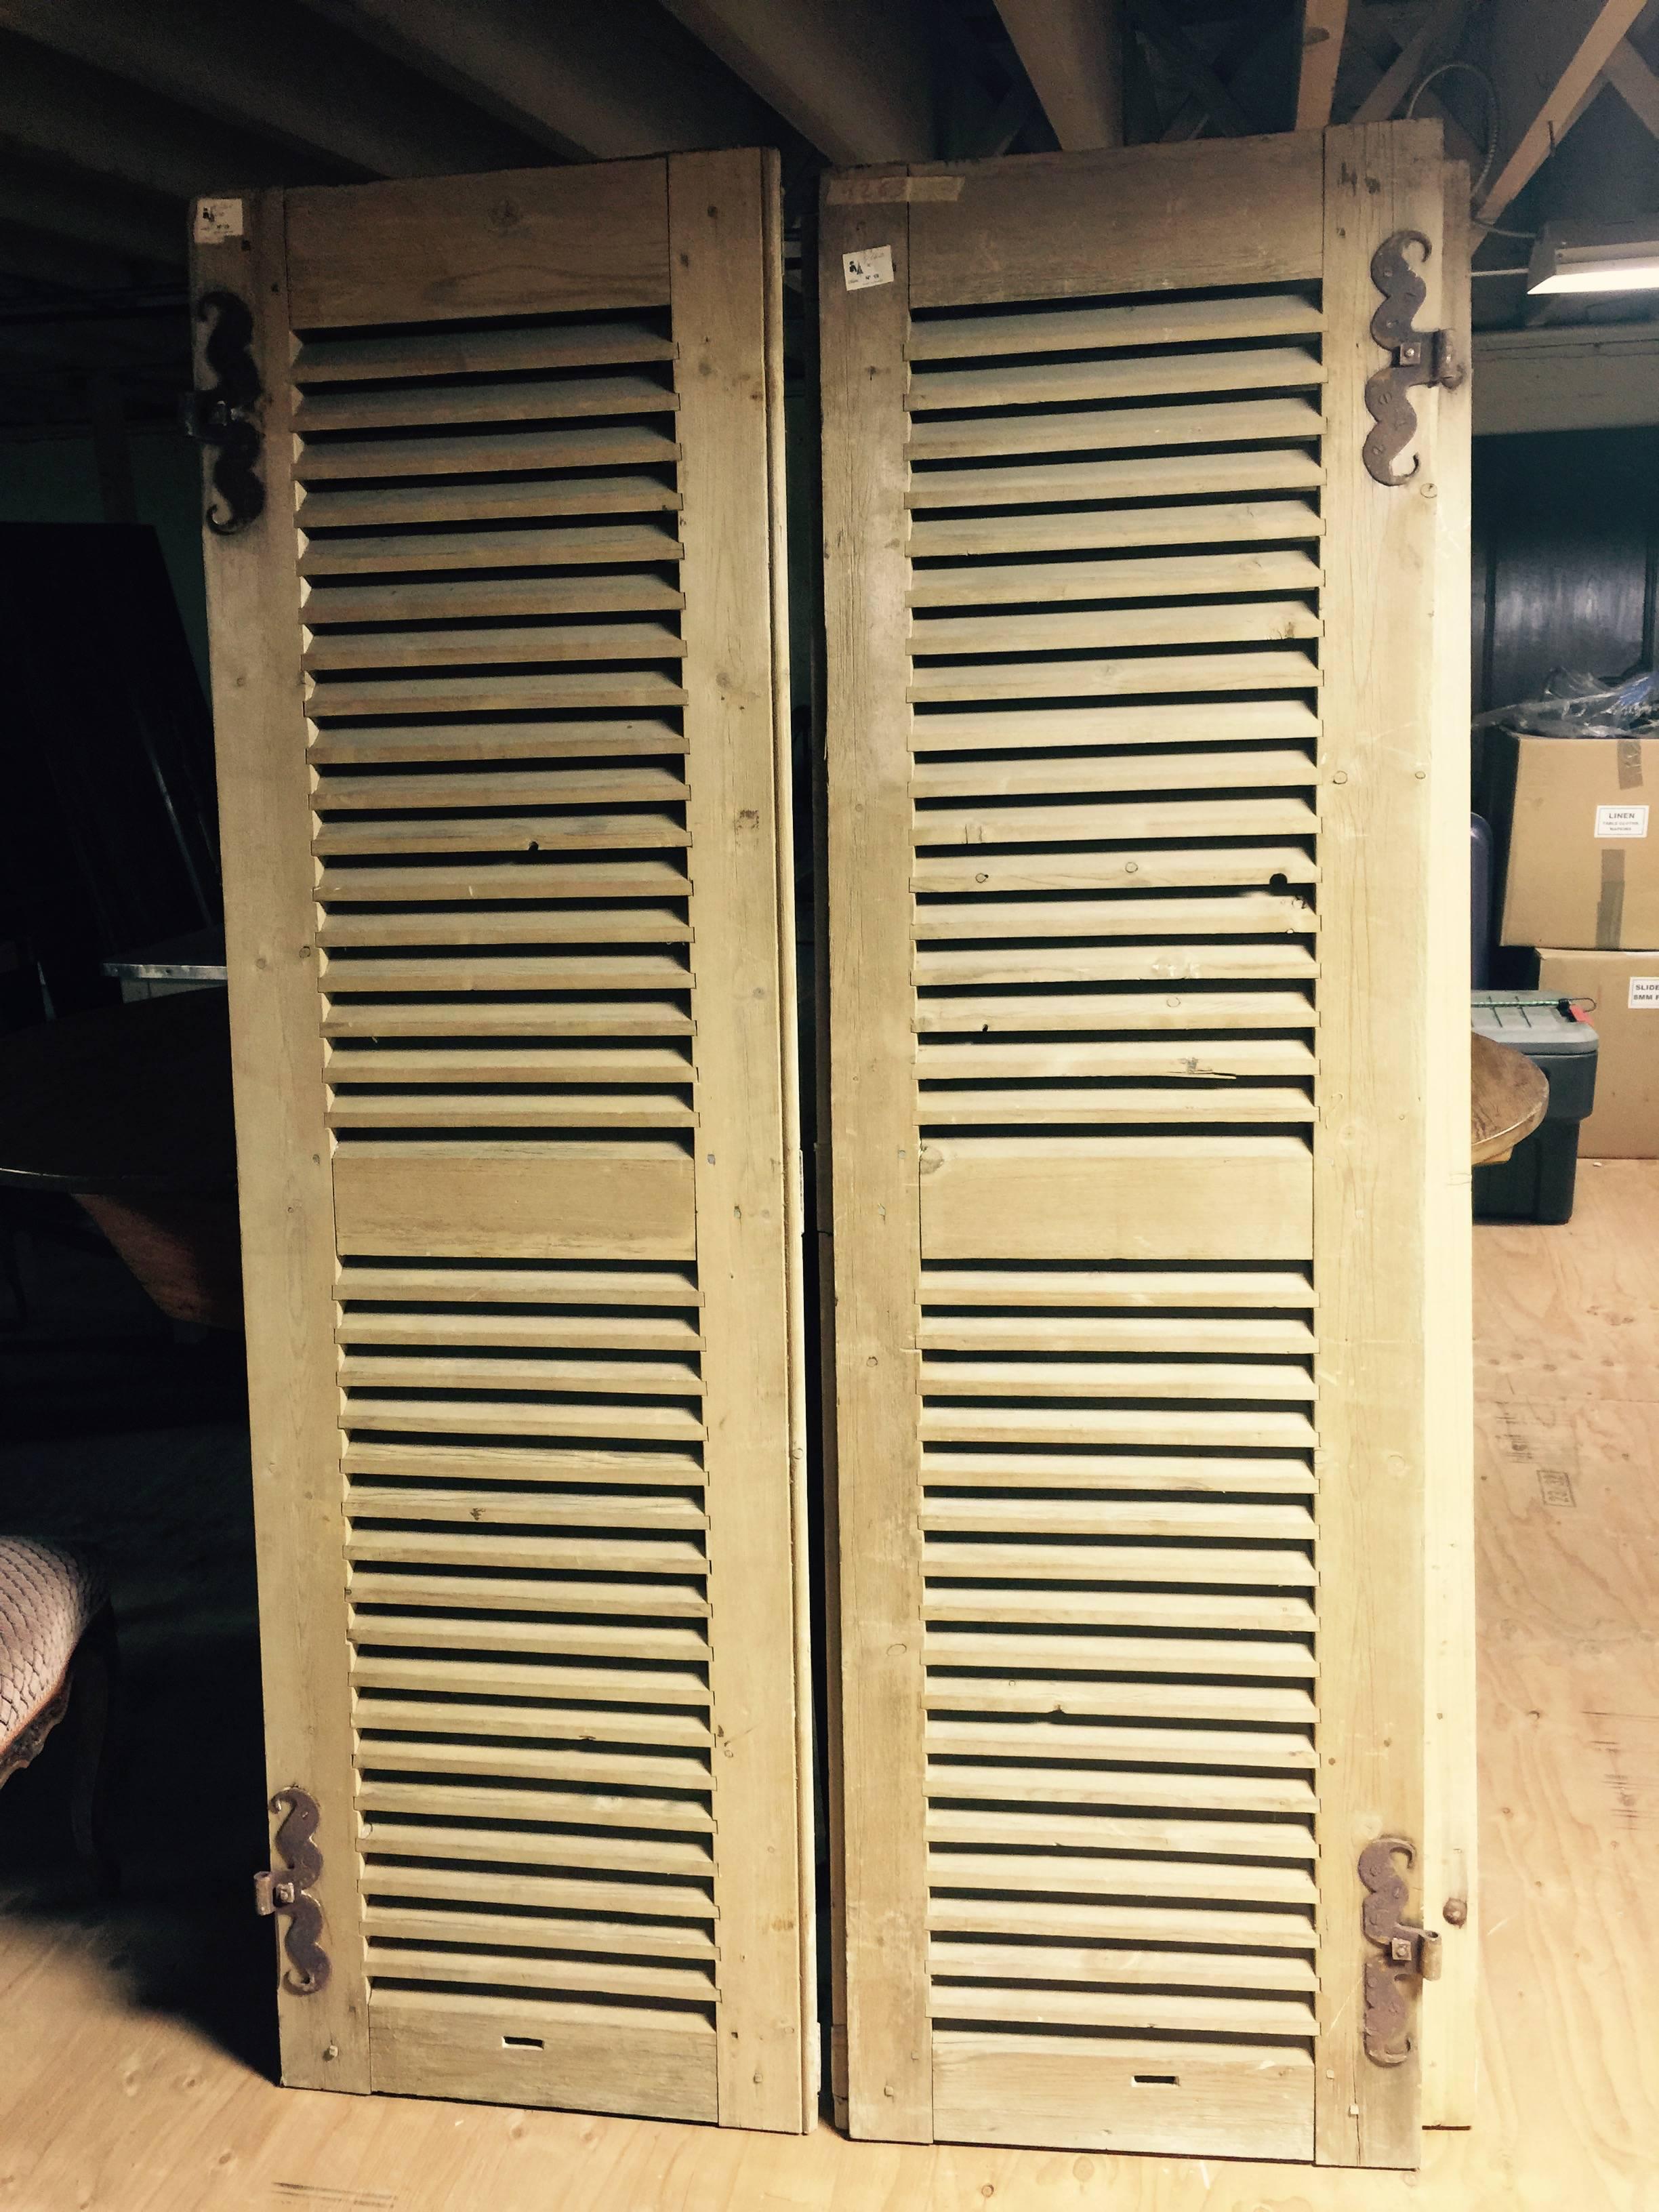 Pair of 19th century French shutters. Color is closer to the images 2 thru 6
another pair available